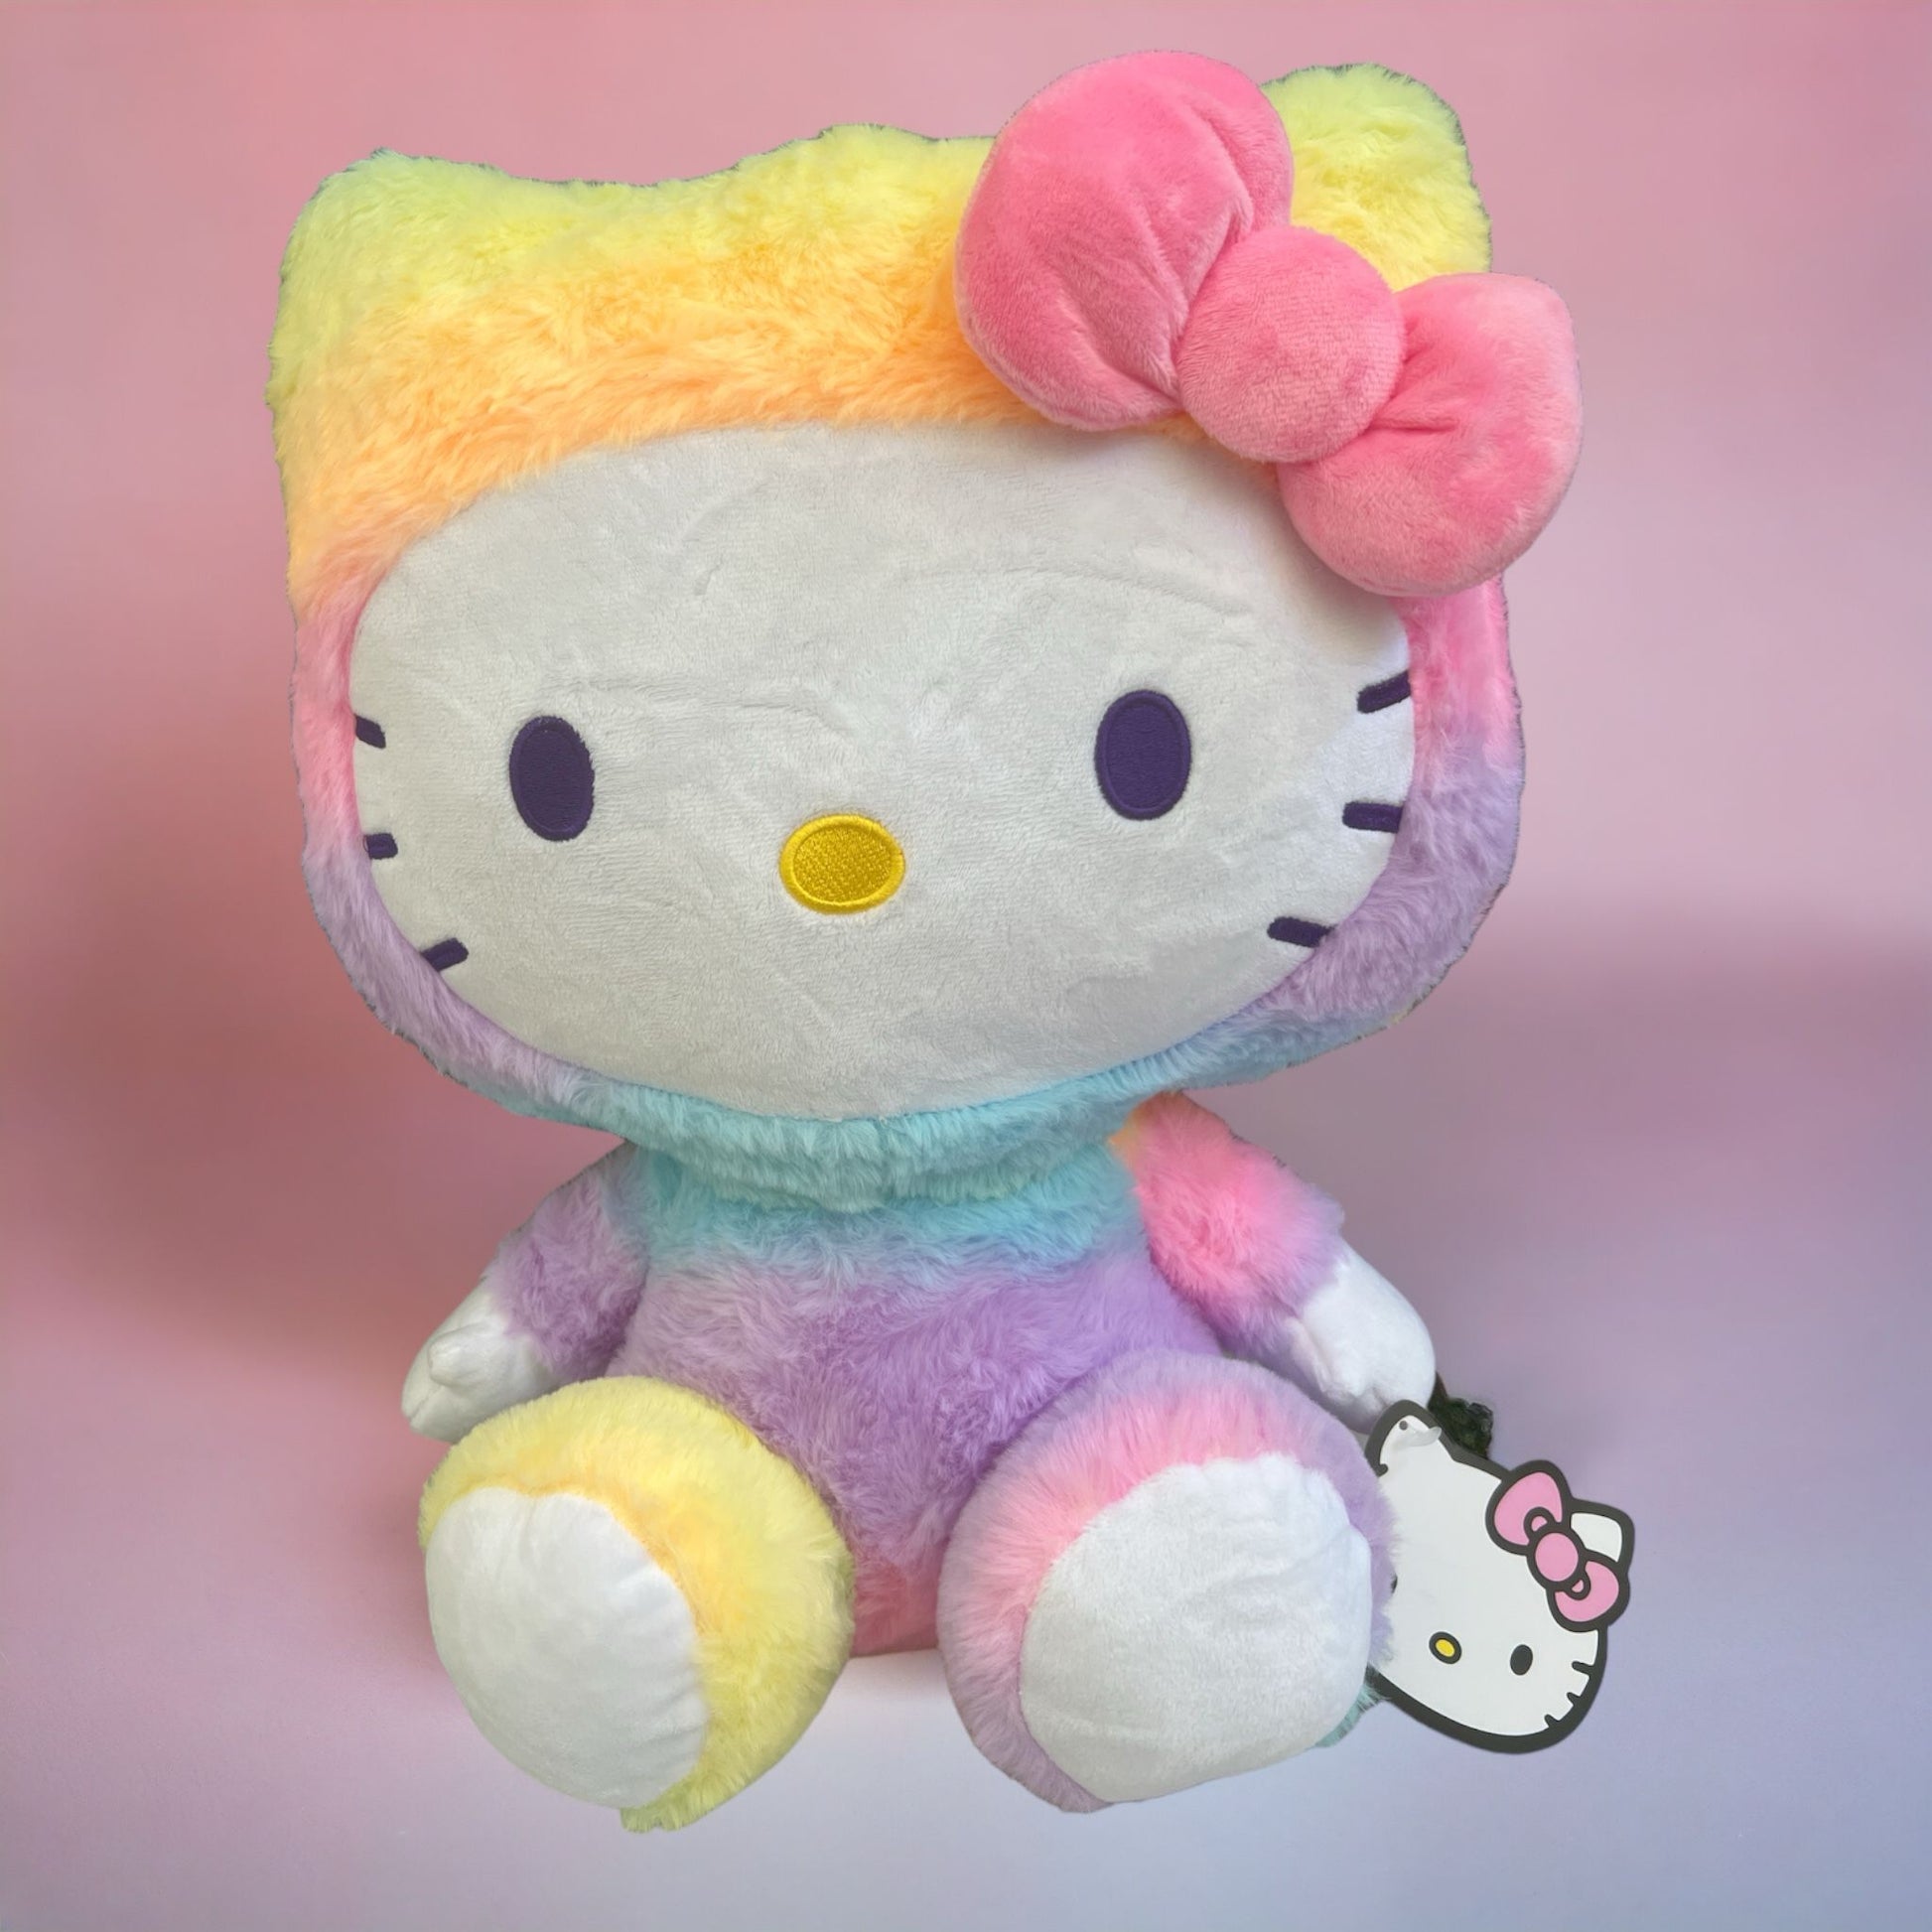 Hello Kitty by Sanrio is wearing a rainbow tie-dye onesie with a pink bow and it's 18 inches tall and it's very soft like a plushie or a pillow